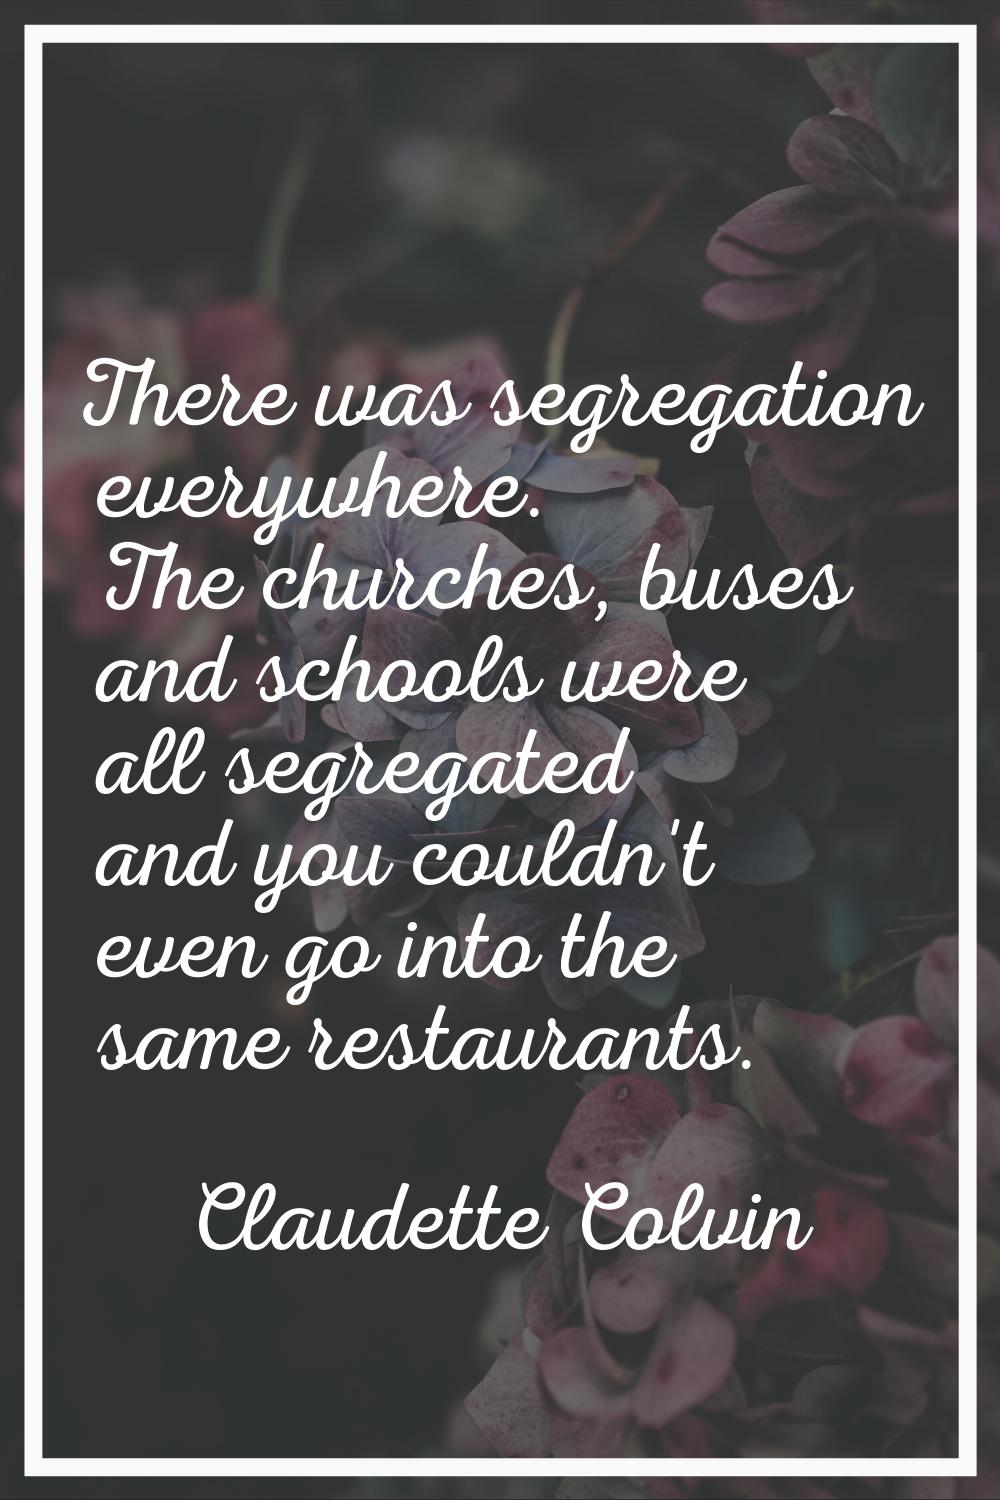 There was segregation everywhere. The churches, buses and schools were all segregated and you could